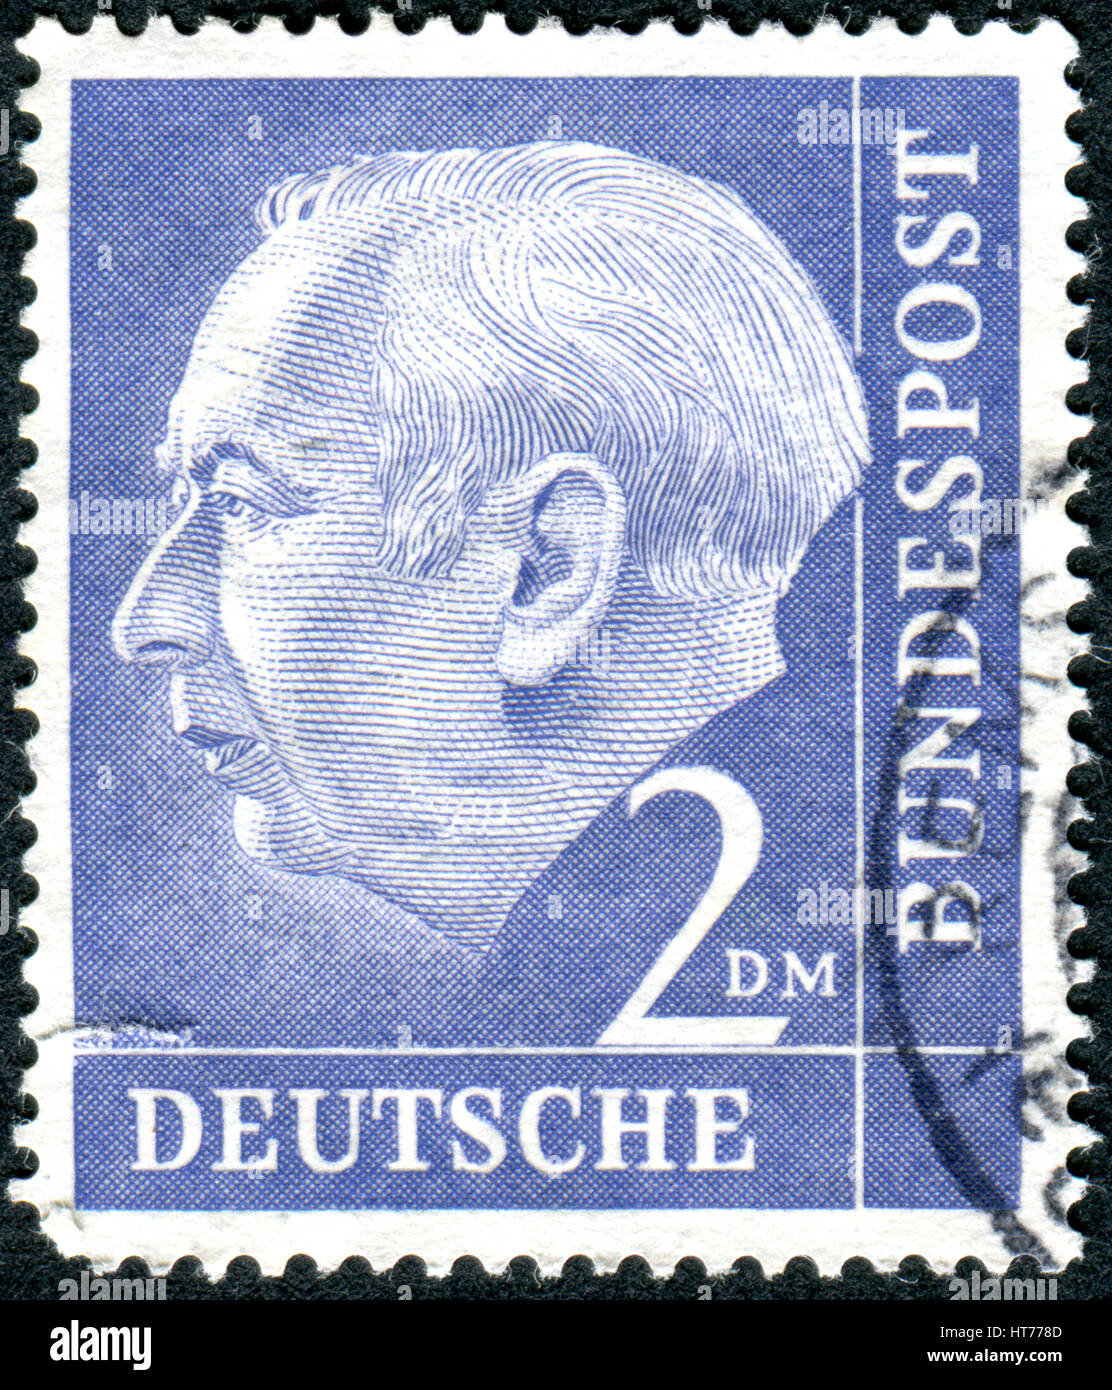 GERMANY - CIRCA 1954: A stamp printed in Germany, shows the 1st President of the Federal Republic of Germany, Prof. Dr. Theodor Heuss, circa 1954 Stock Photo